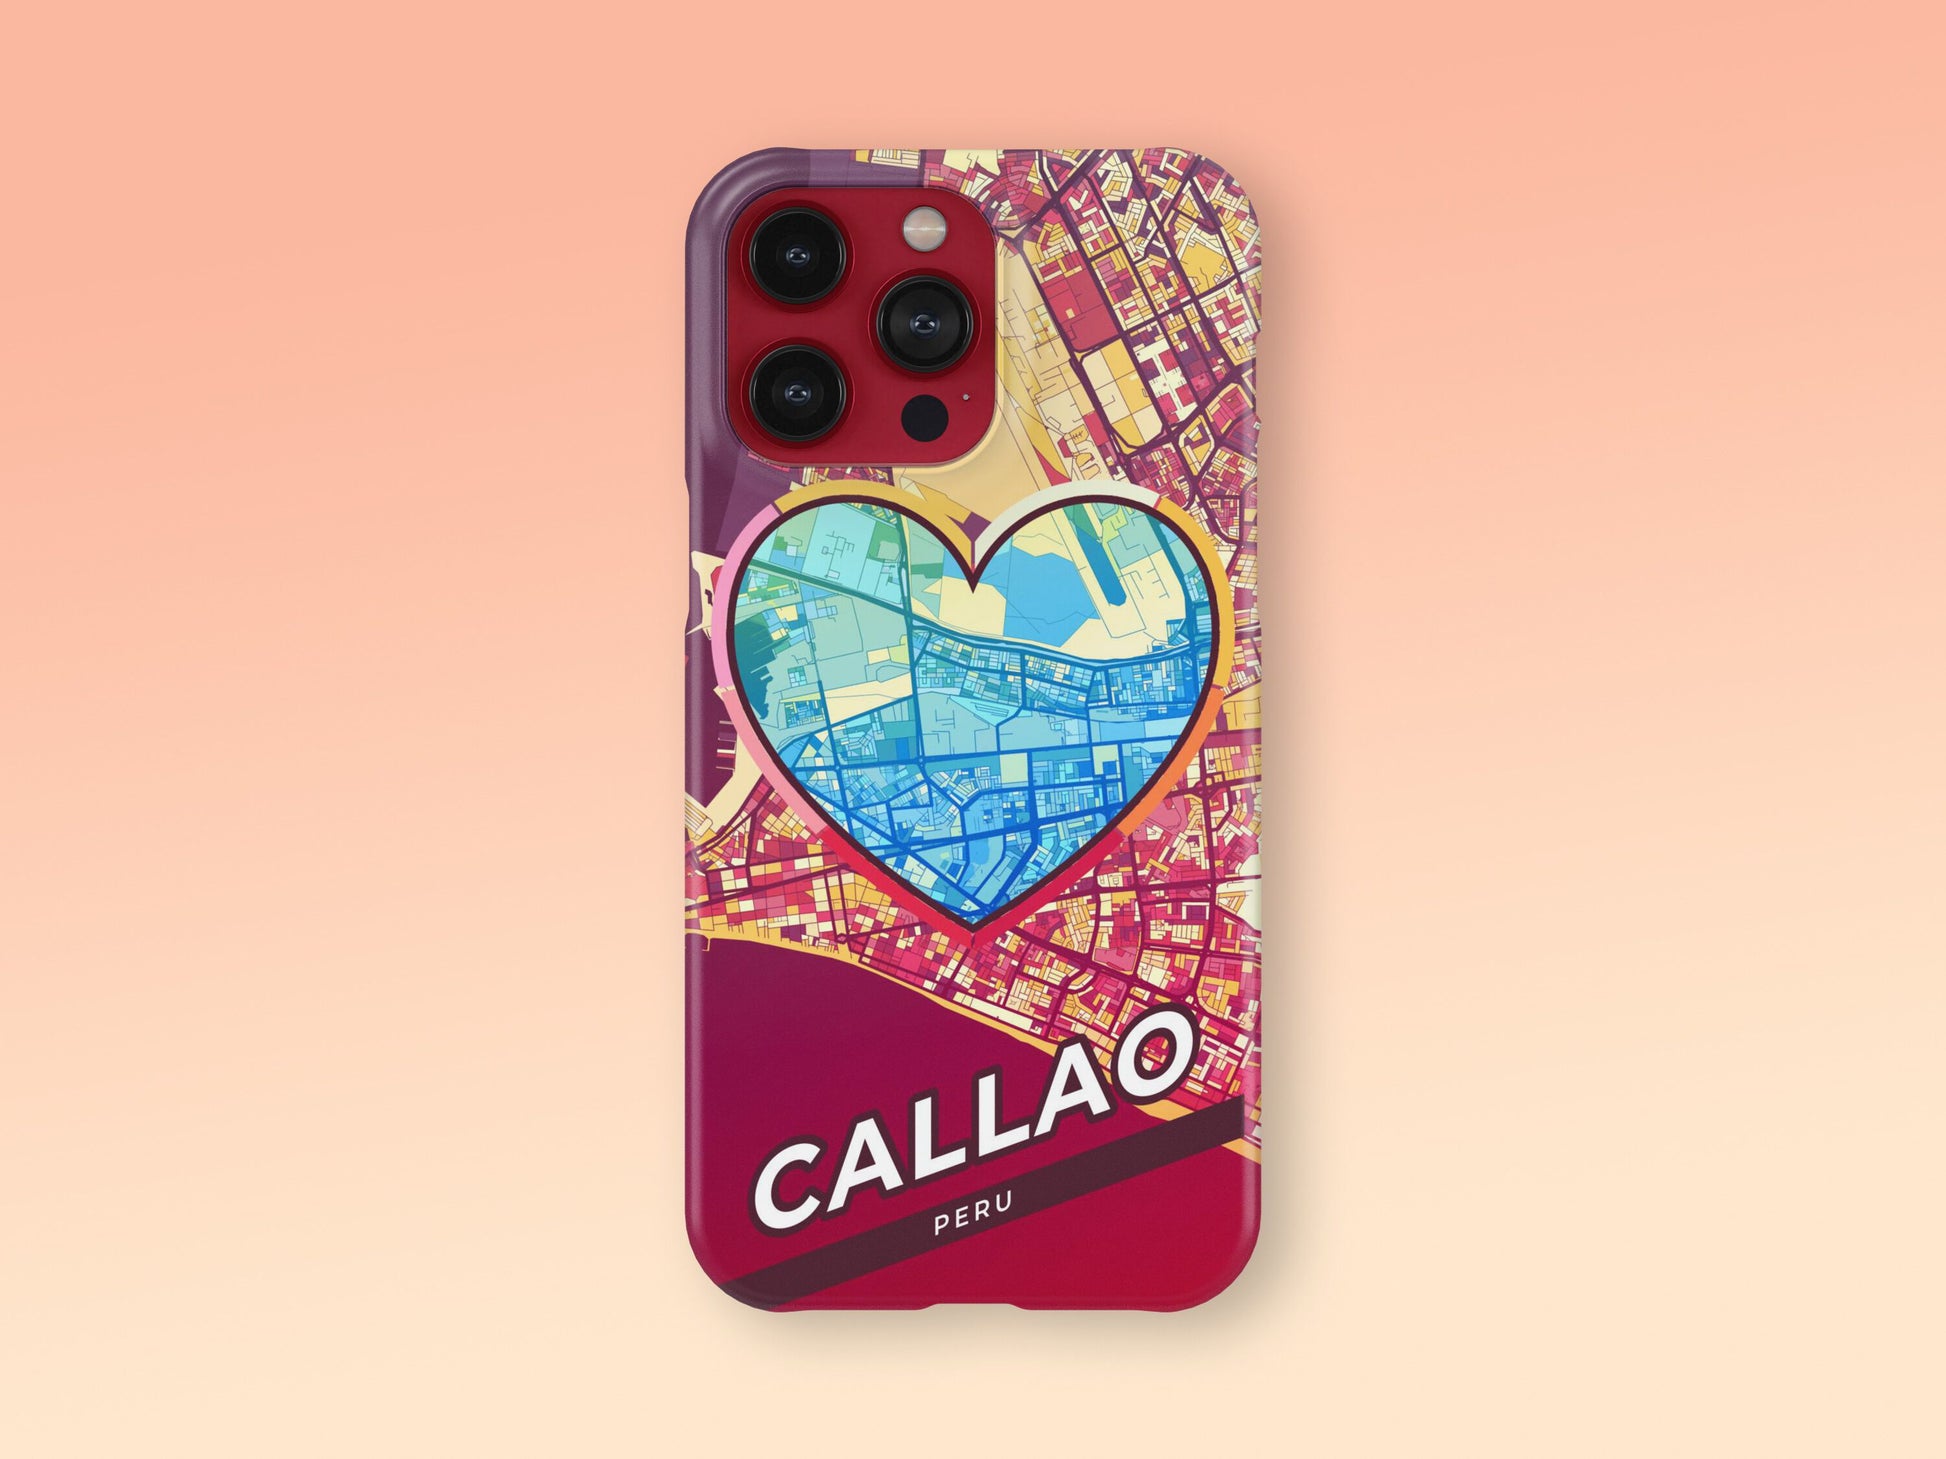 Callao Peru slim phone case with colorful icon. Birthday, wedding or housewarming gift. Couple match cases. 2